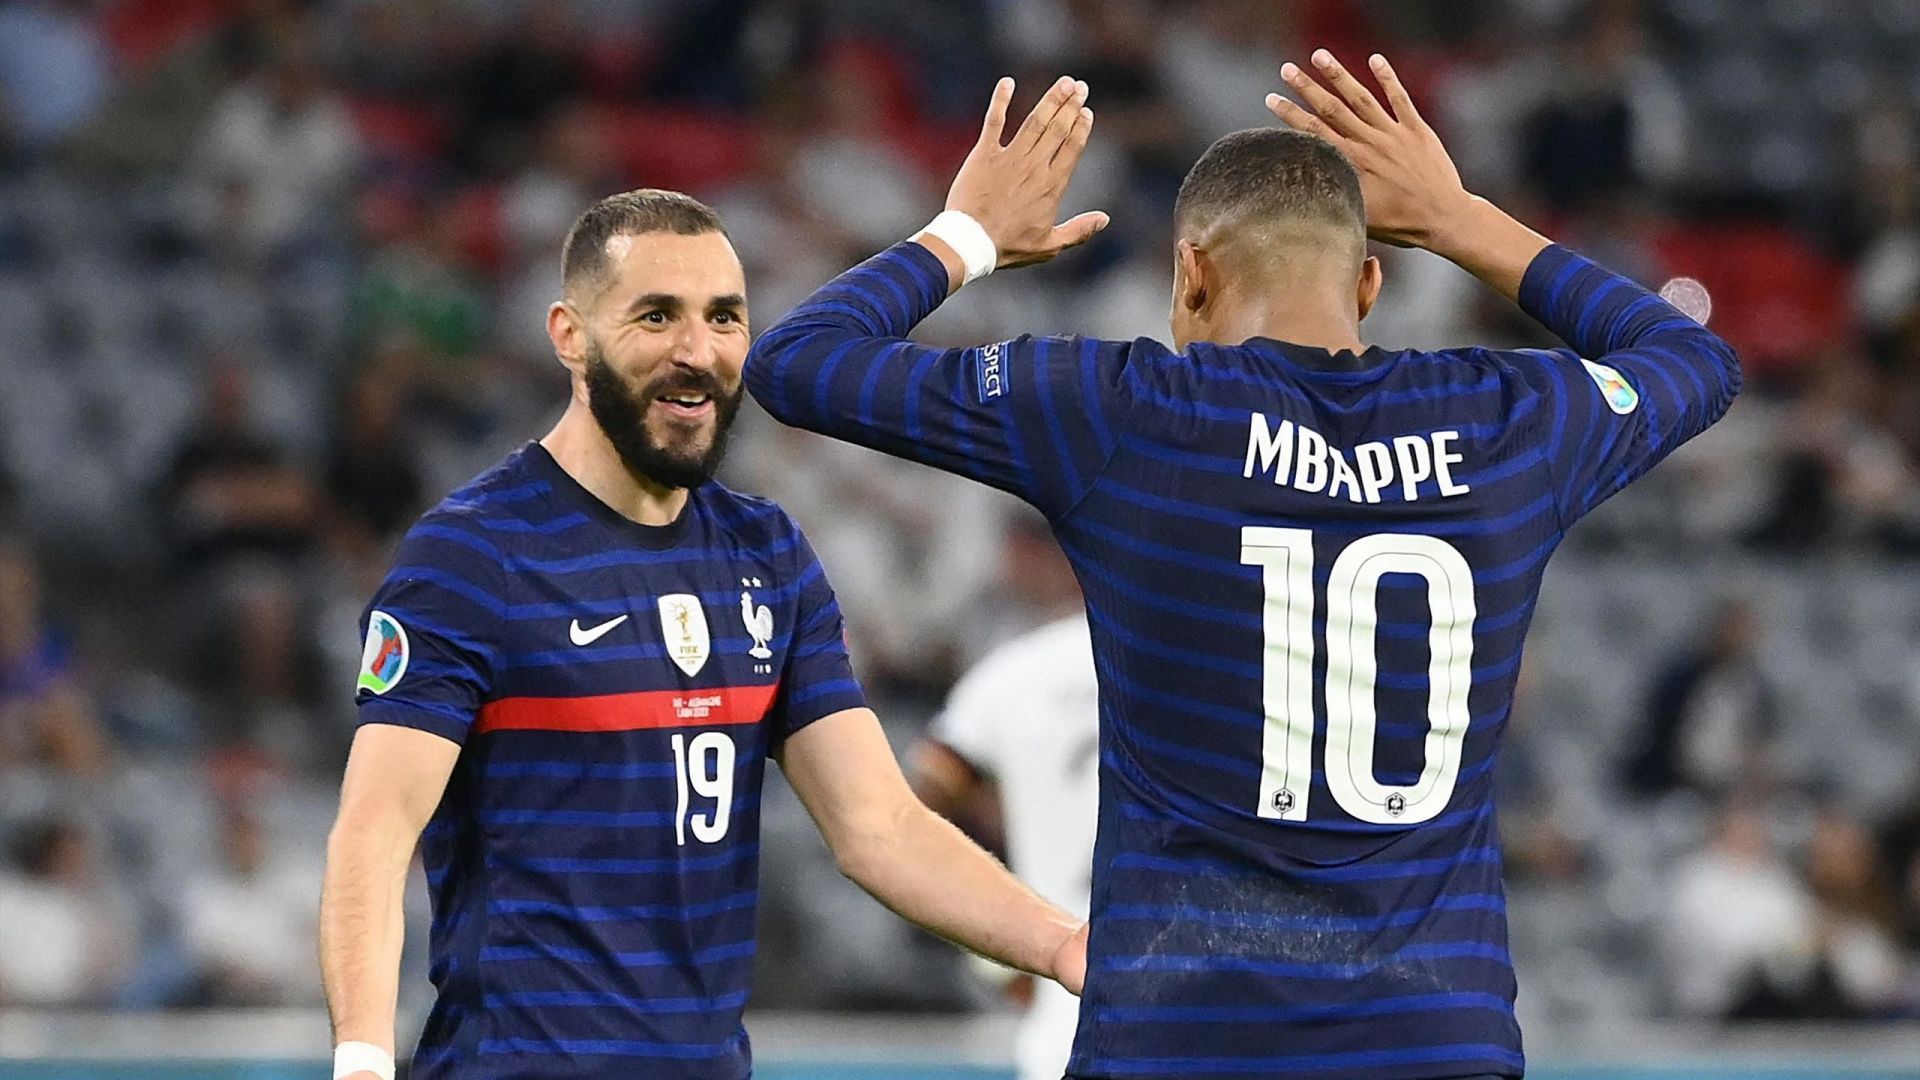 Karim Benzema and Kylian Mbappe are two of the greatest strikers in the world at present.